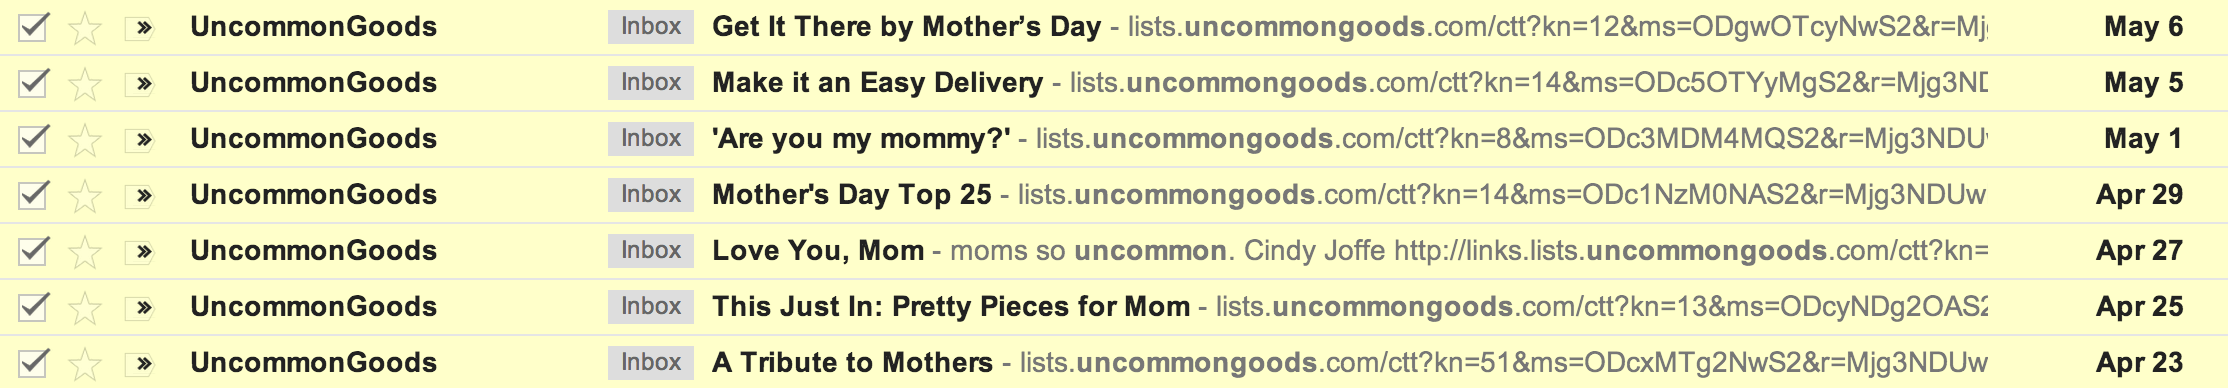 Email Subject Lines for Mother's Day Inspiration